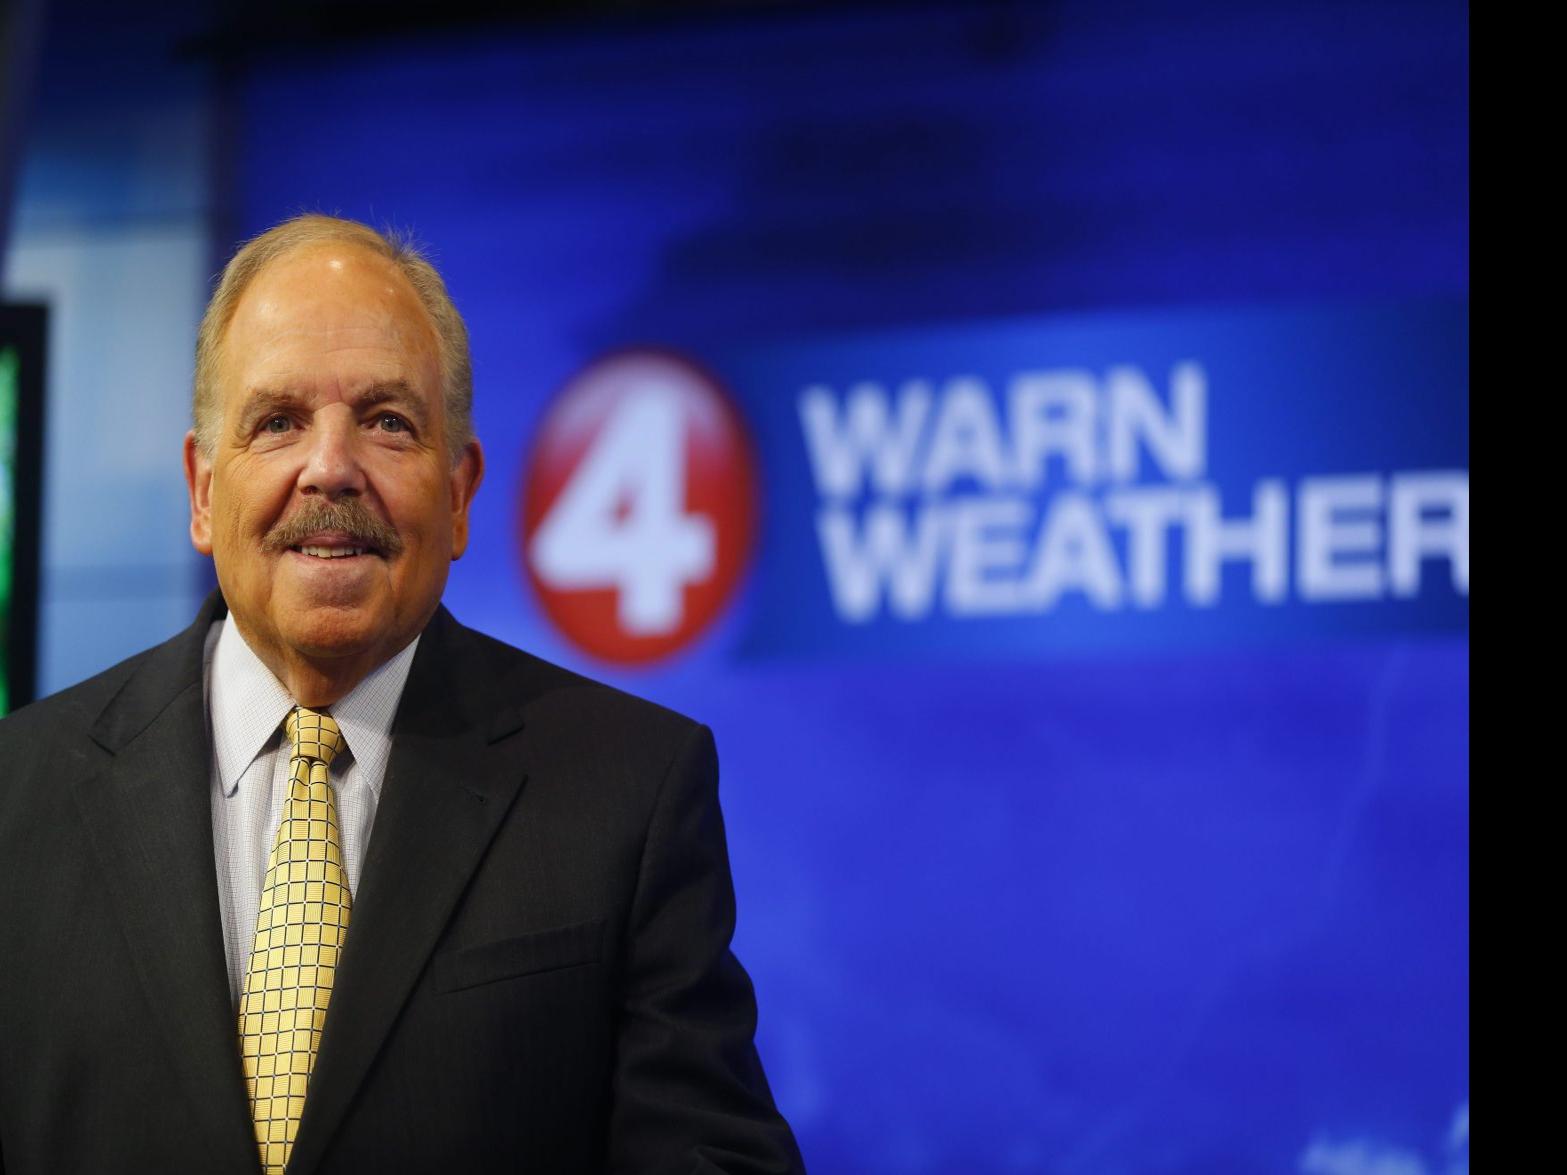 After 30 years predicting the weather, Ch. 4's Don hopes for sunny retirement Entertainment | buffalonews.com